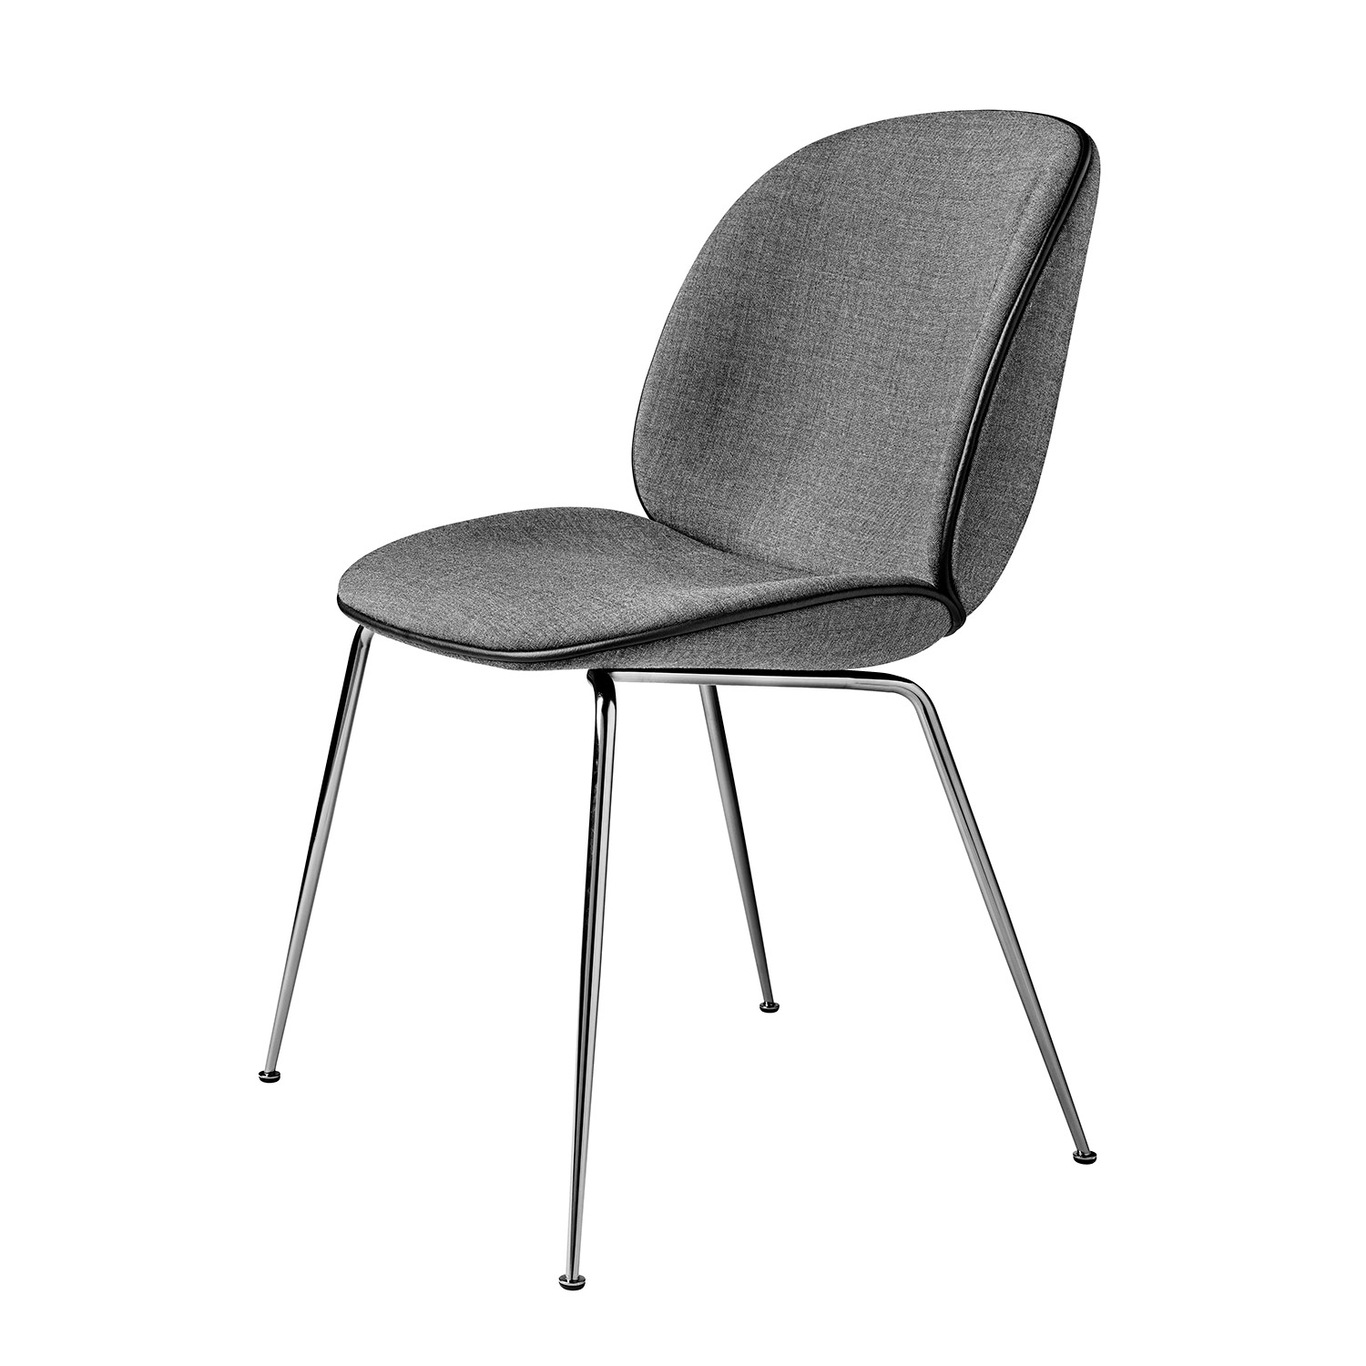 Beetle Dining Chair Fully Upholstered, Conic Base Chrome, Remix 152